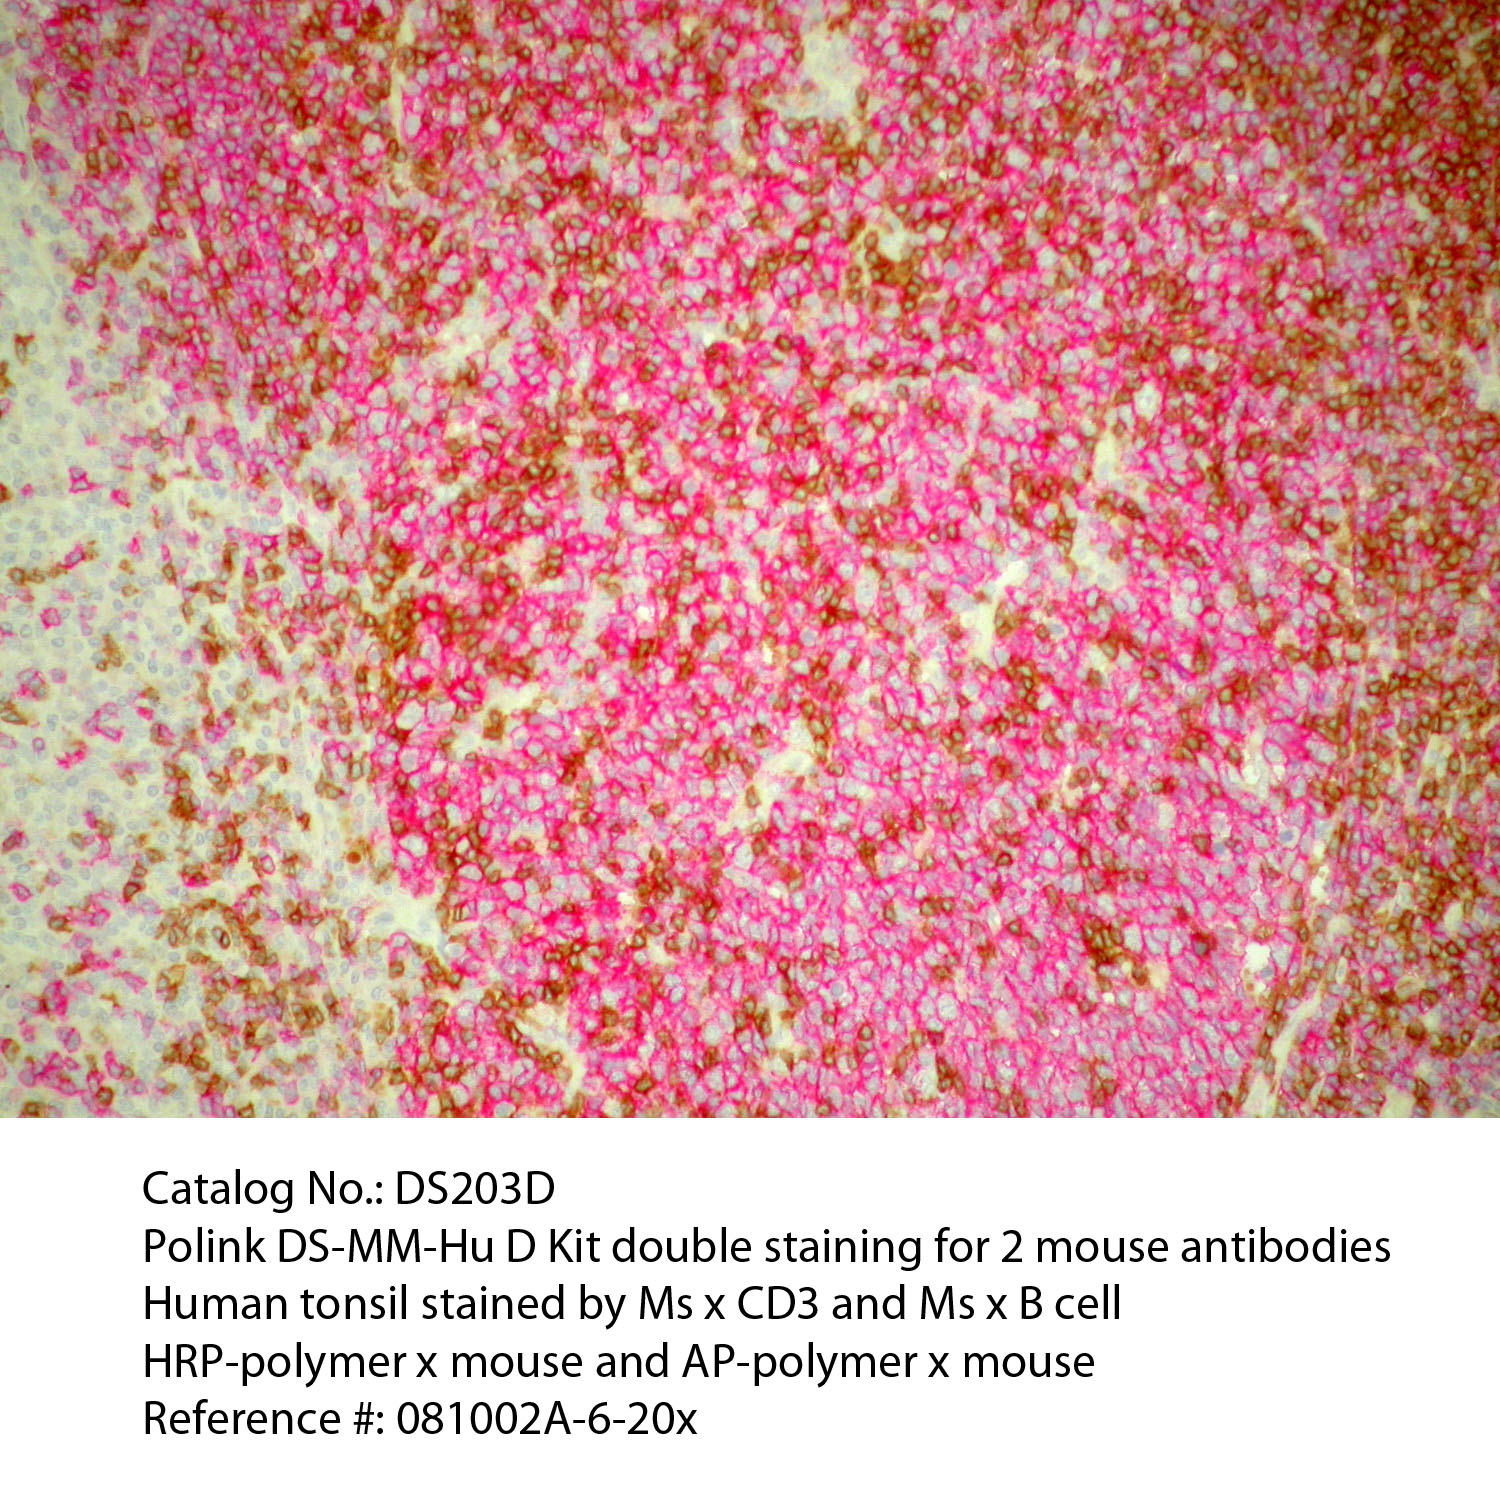 IHC staining of FFPE human tonsil tissue within normal limits using mouse anti-B cell and mouse anti-CD3 polyclonal antibodies and Polink DS-MM-Hu A detection kit [DS203A-18]. The red and brown stain indicate positive stain and blue is the counter stain. It is mounted using a permanent aqueous mounting medium [E03-18].